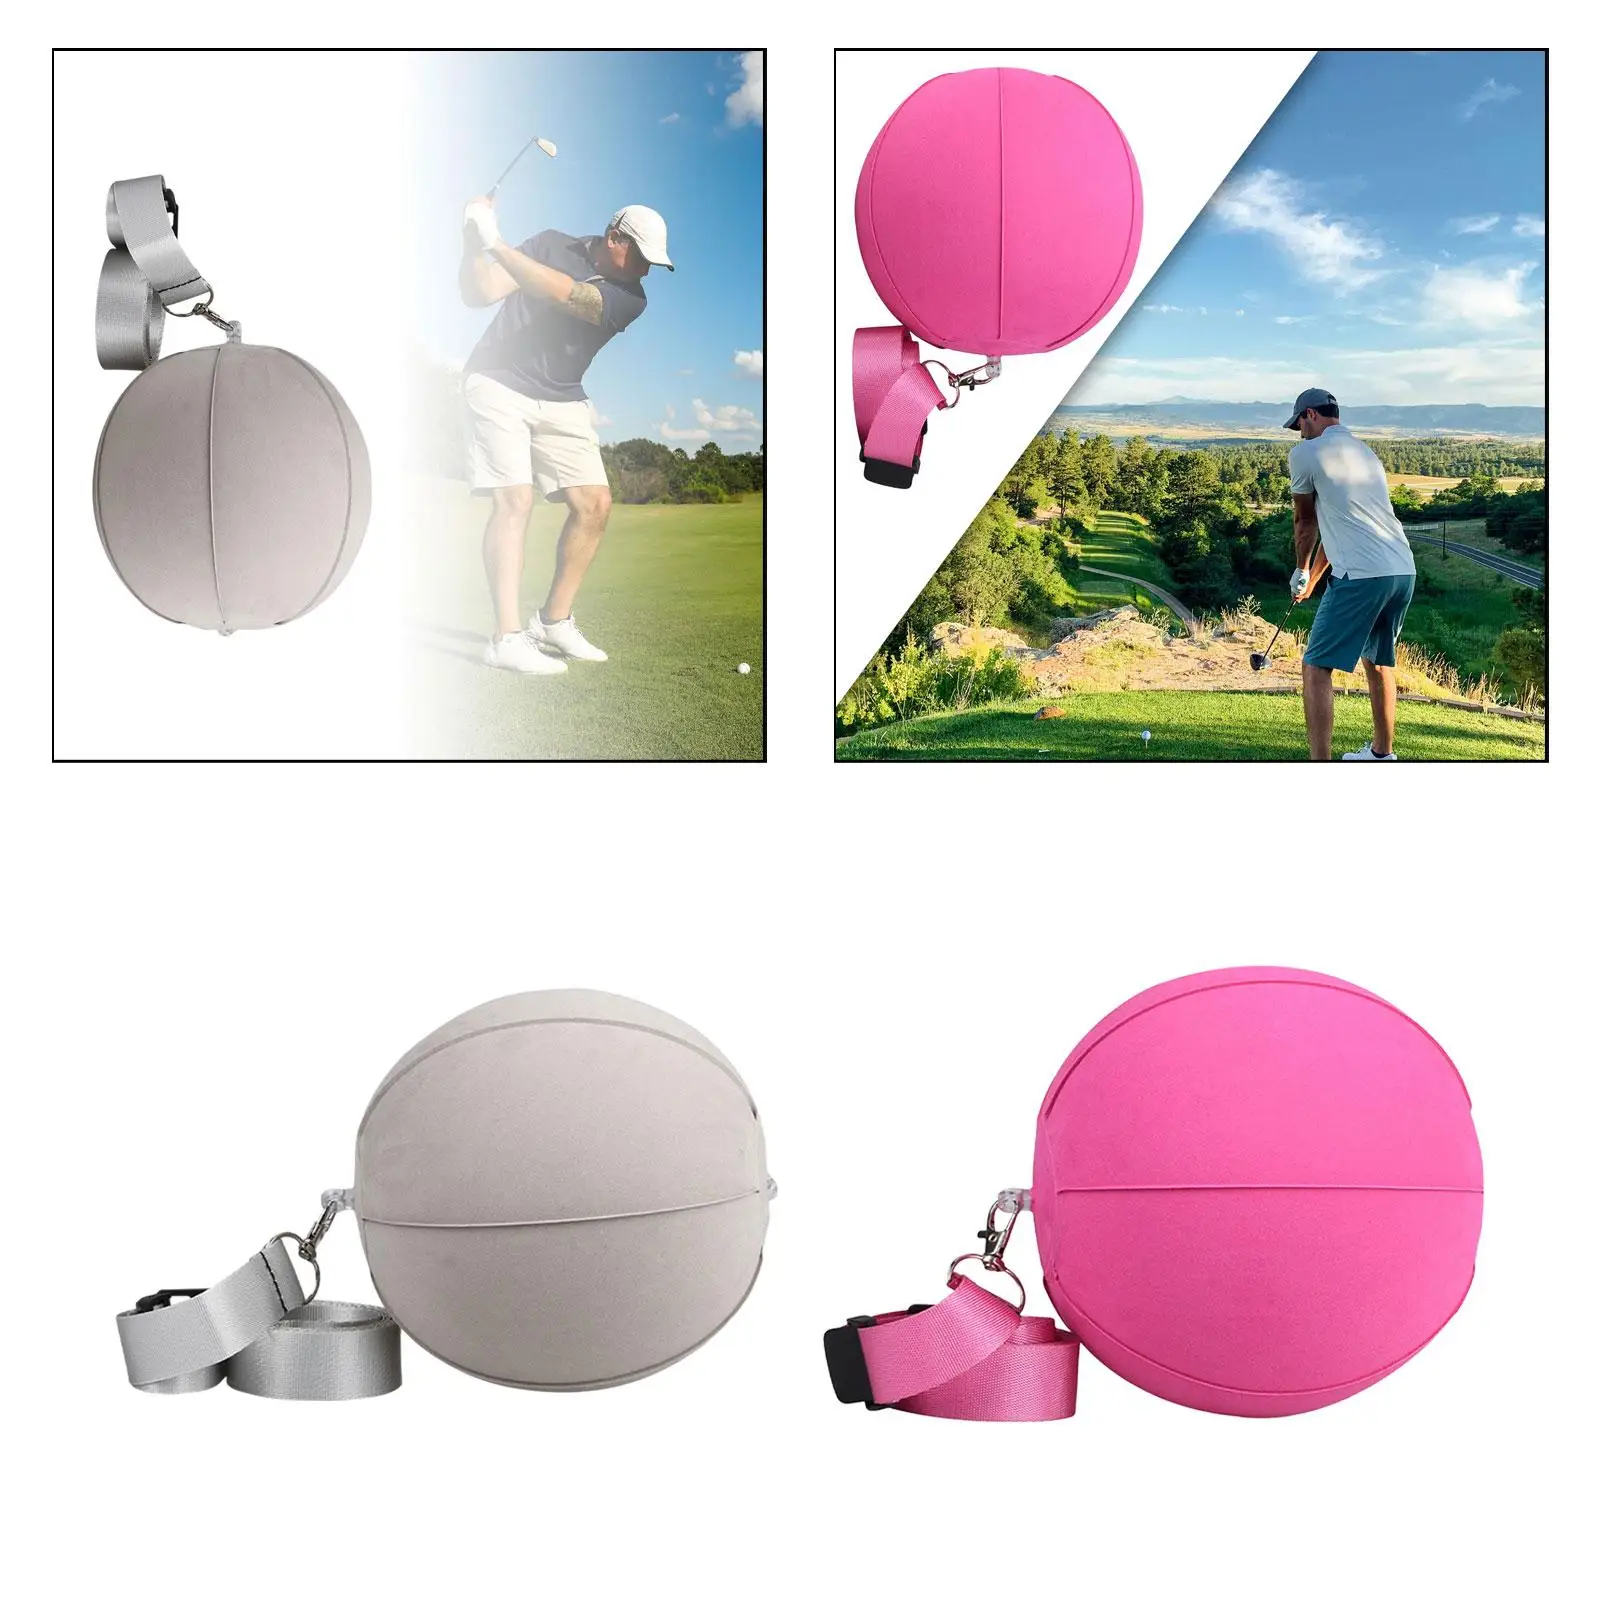 Golf Smart Ball Posture Motion Correction Portable Arm Motion Guide Swing Assistant Golf Training Ball Inflatable Impact Ball